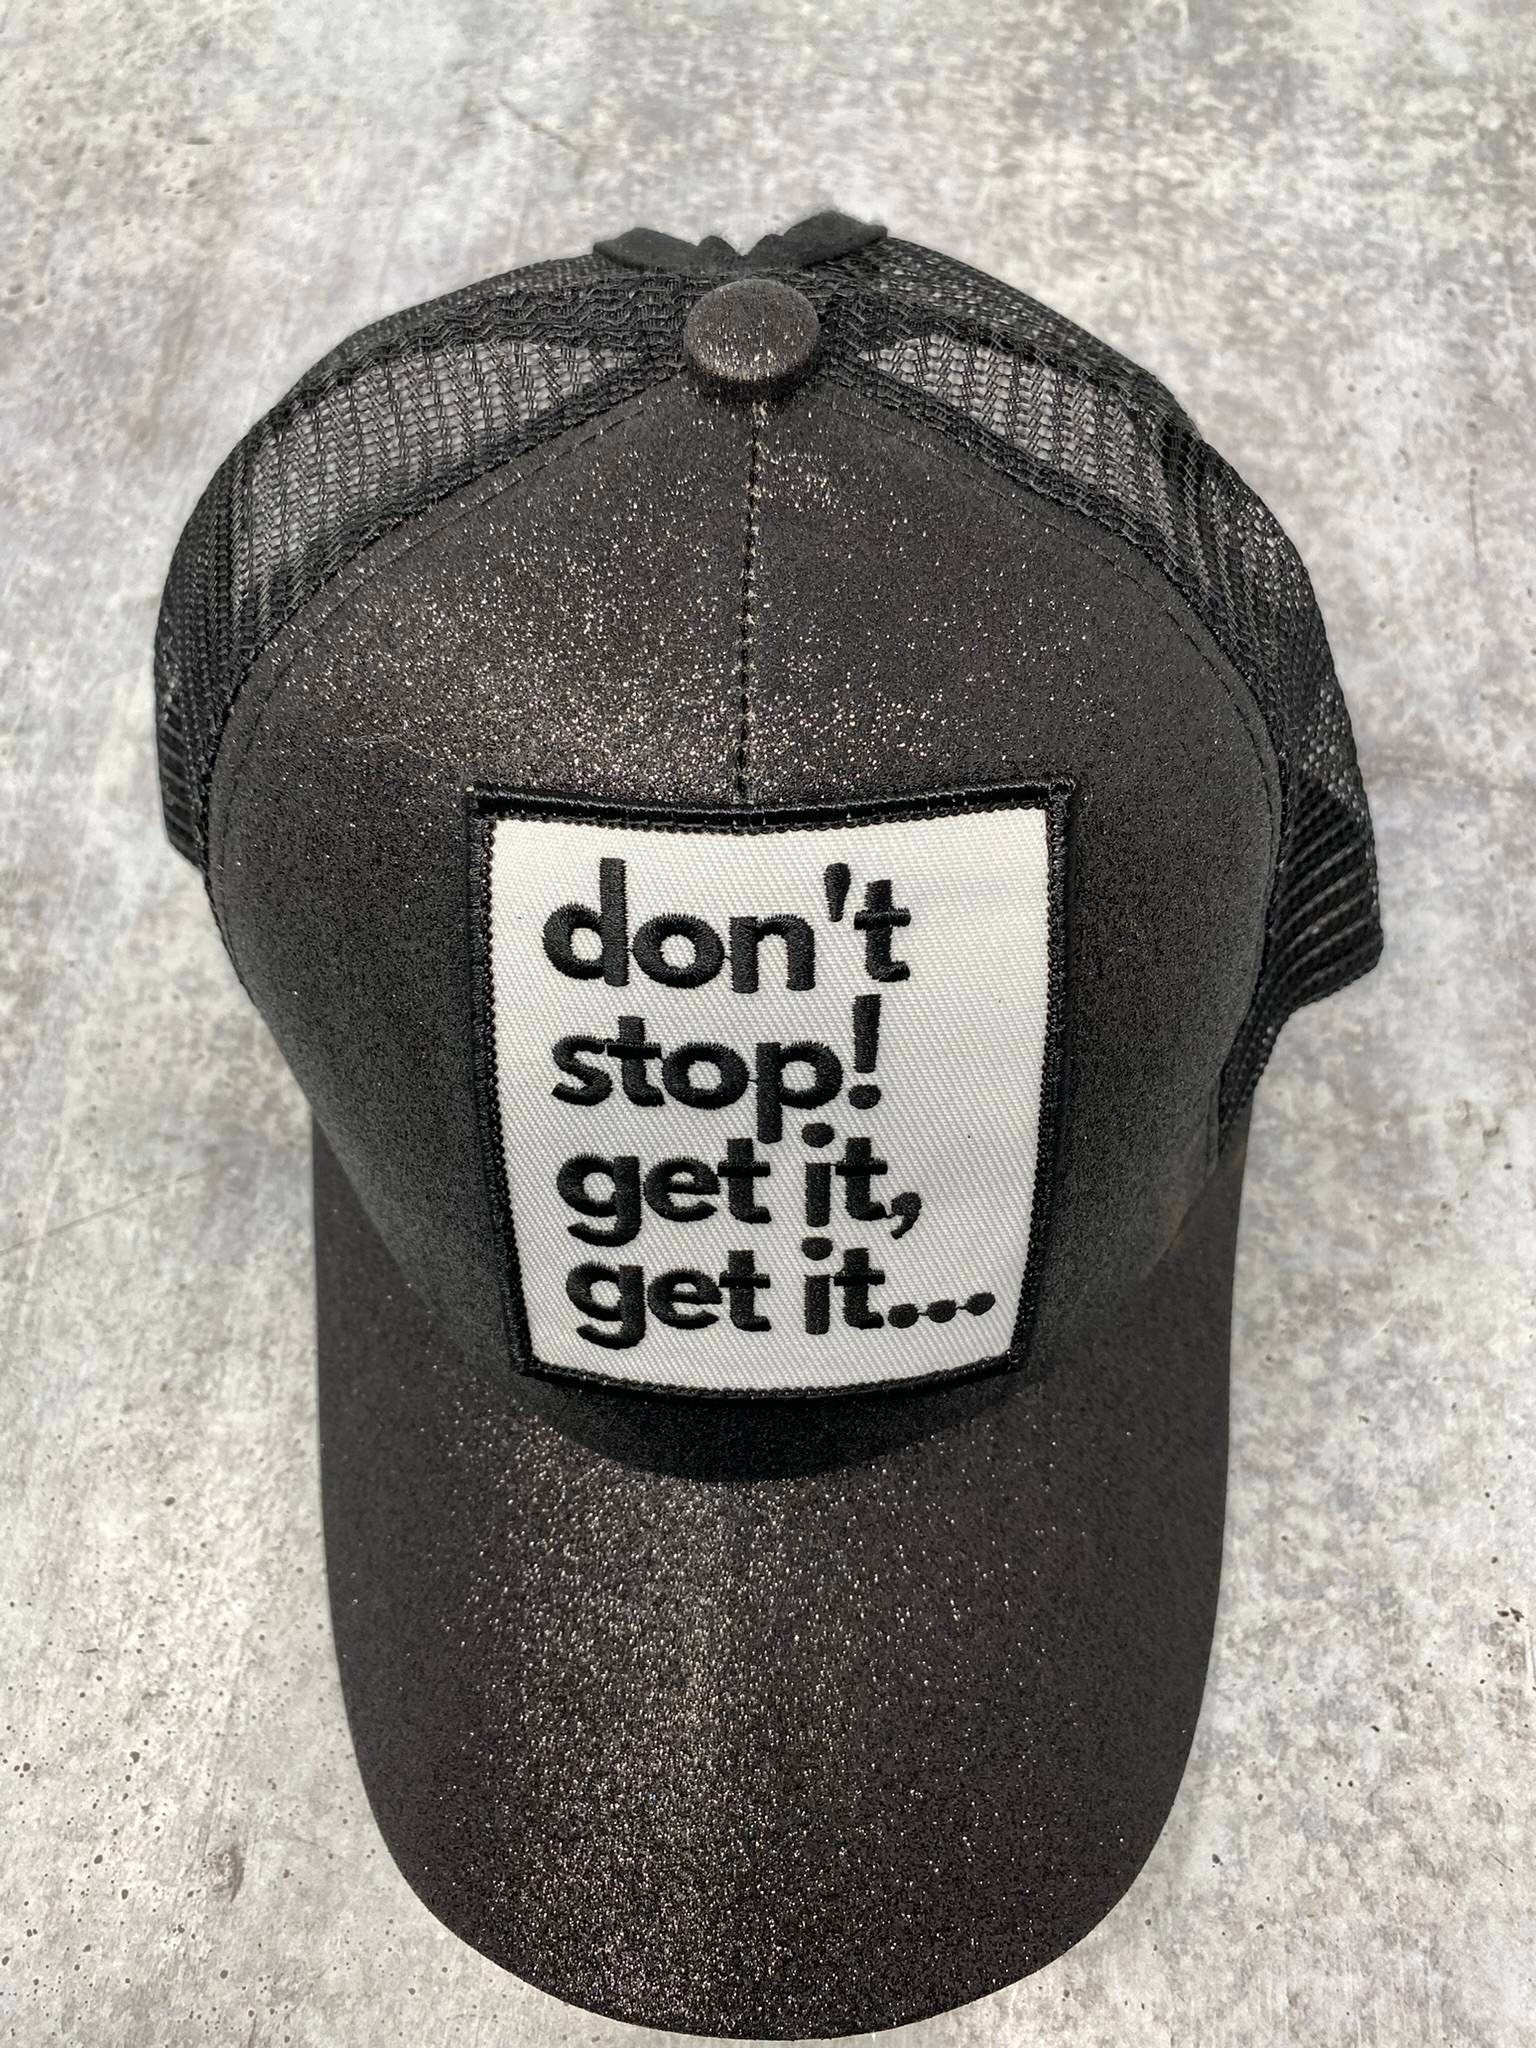 Cute BLACK Glitter, Ponytail Hat, w/"Don't Stop Get It" Patch, Sparkling Bad Hair Day Hat, Cute Hat for Sunblocking, & Summer Hairstyles